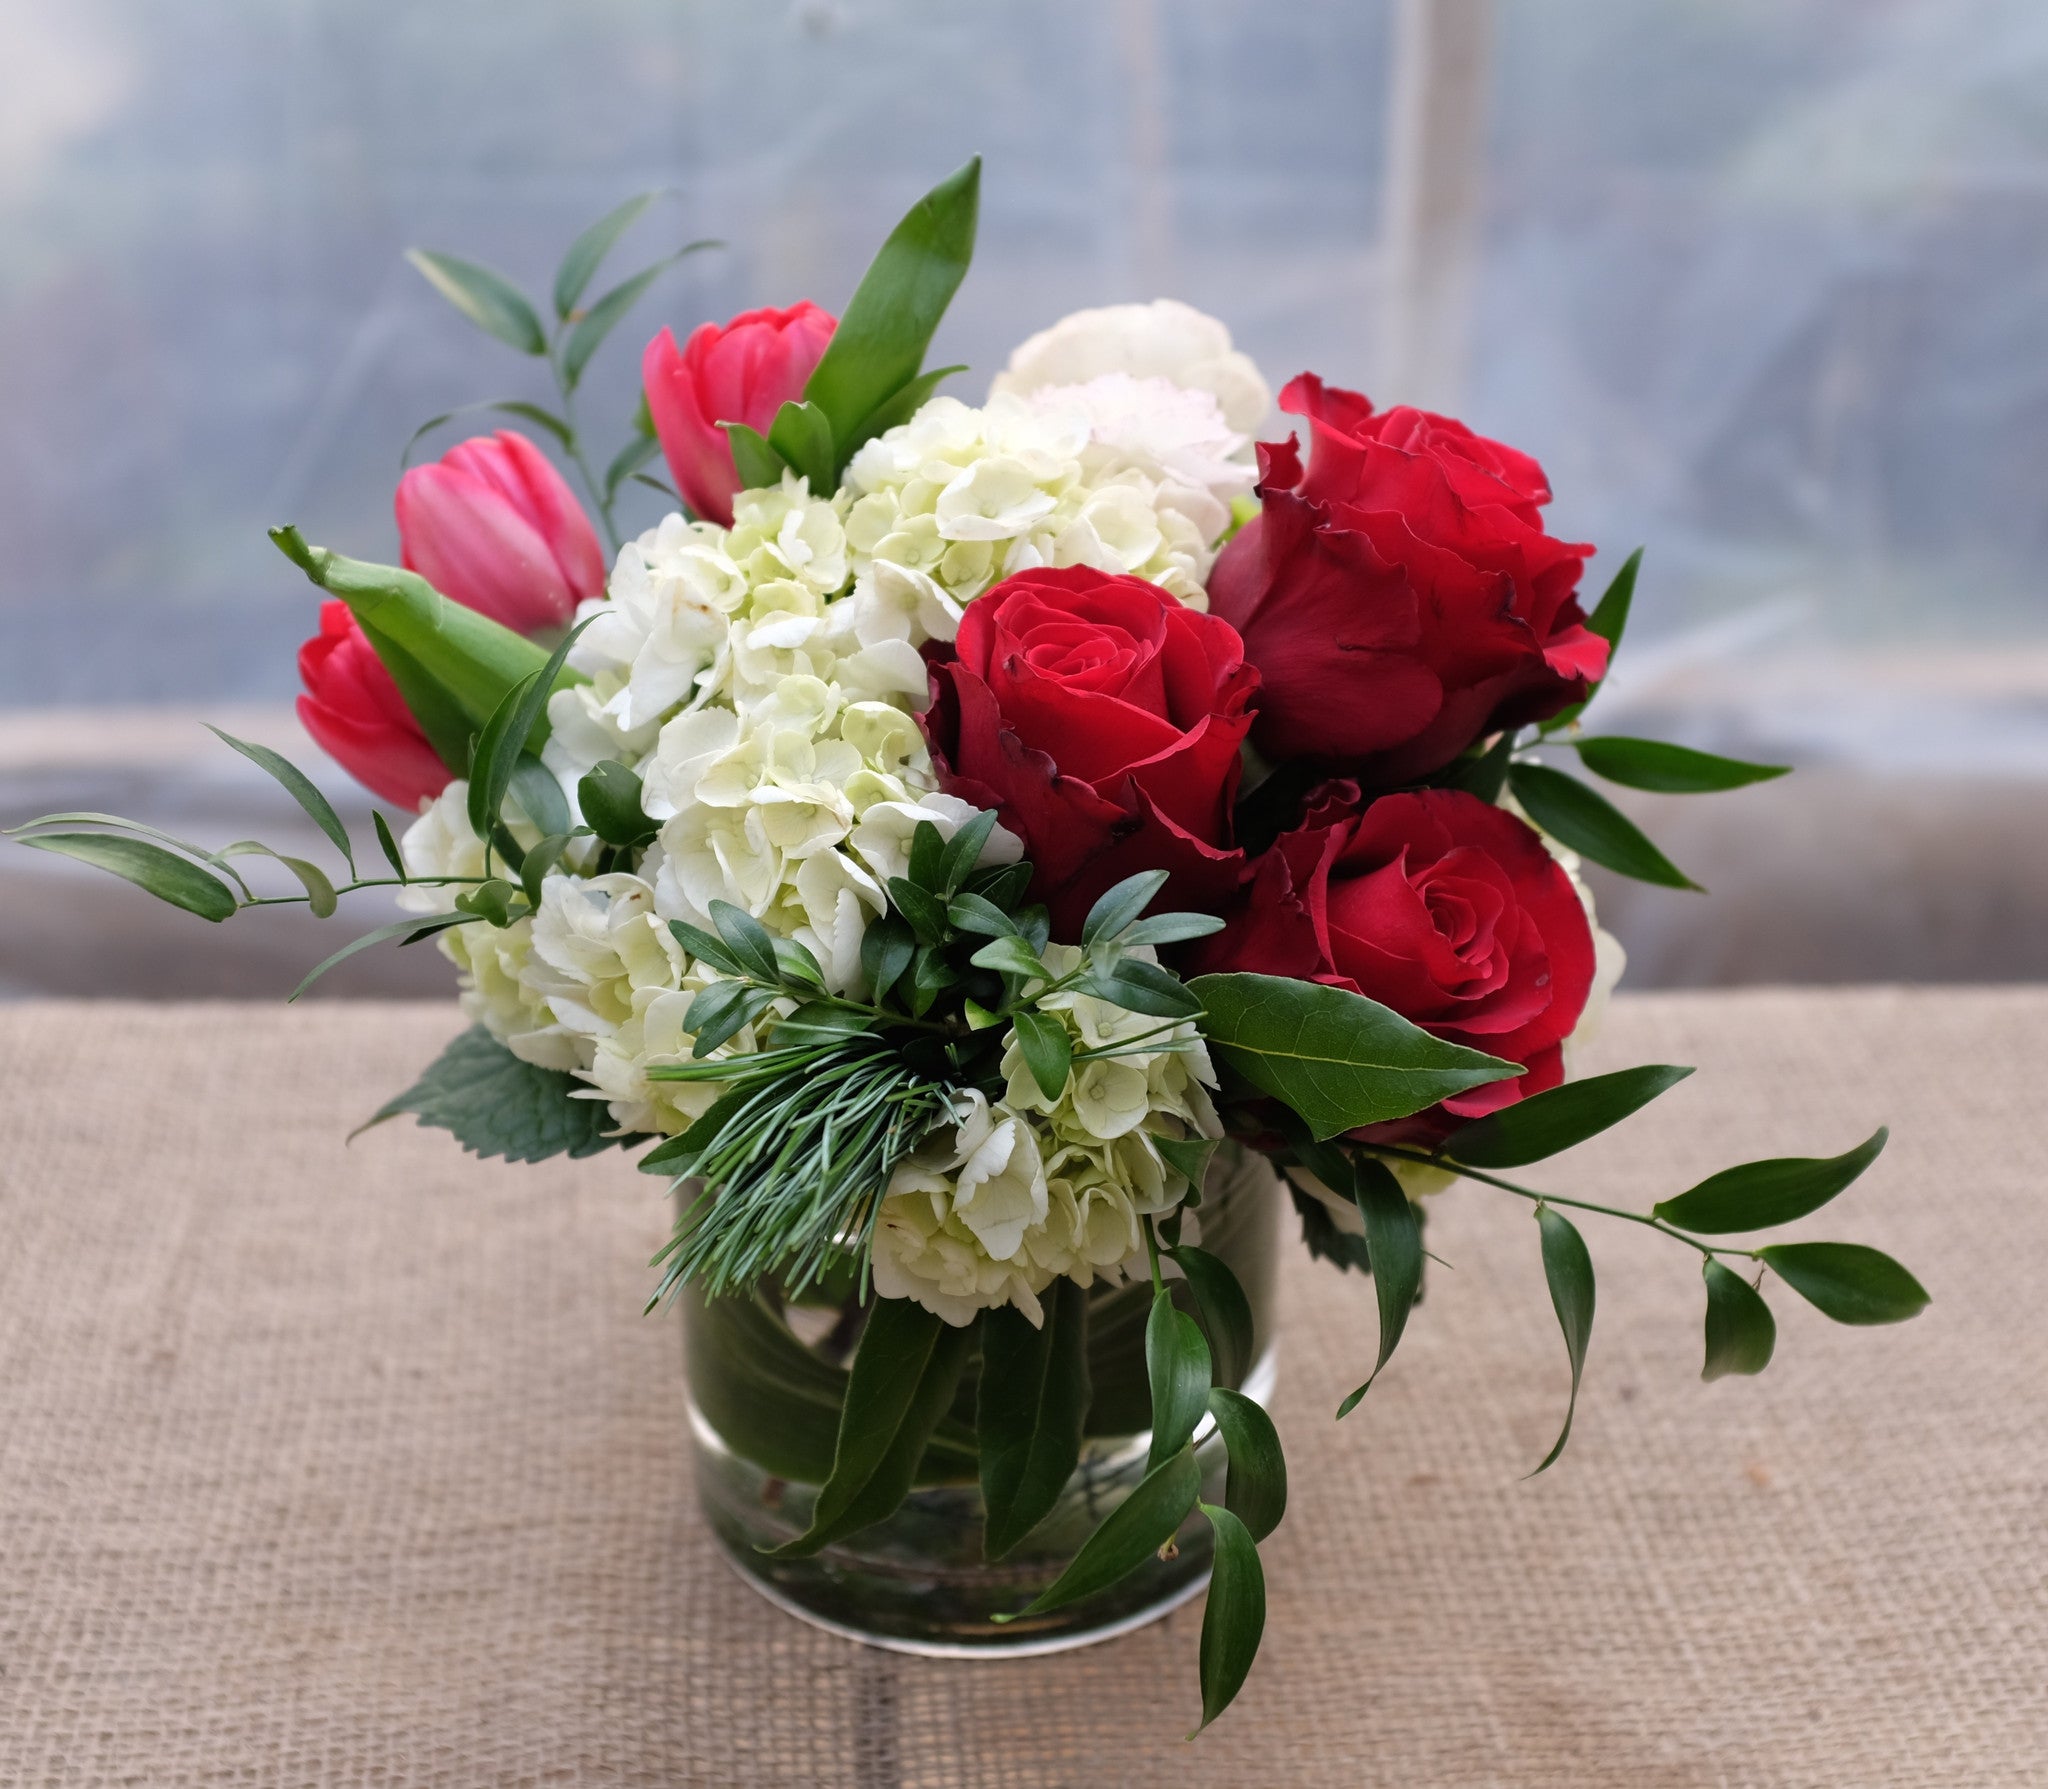 small holiday floral arrangements